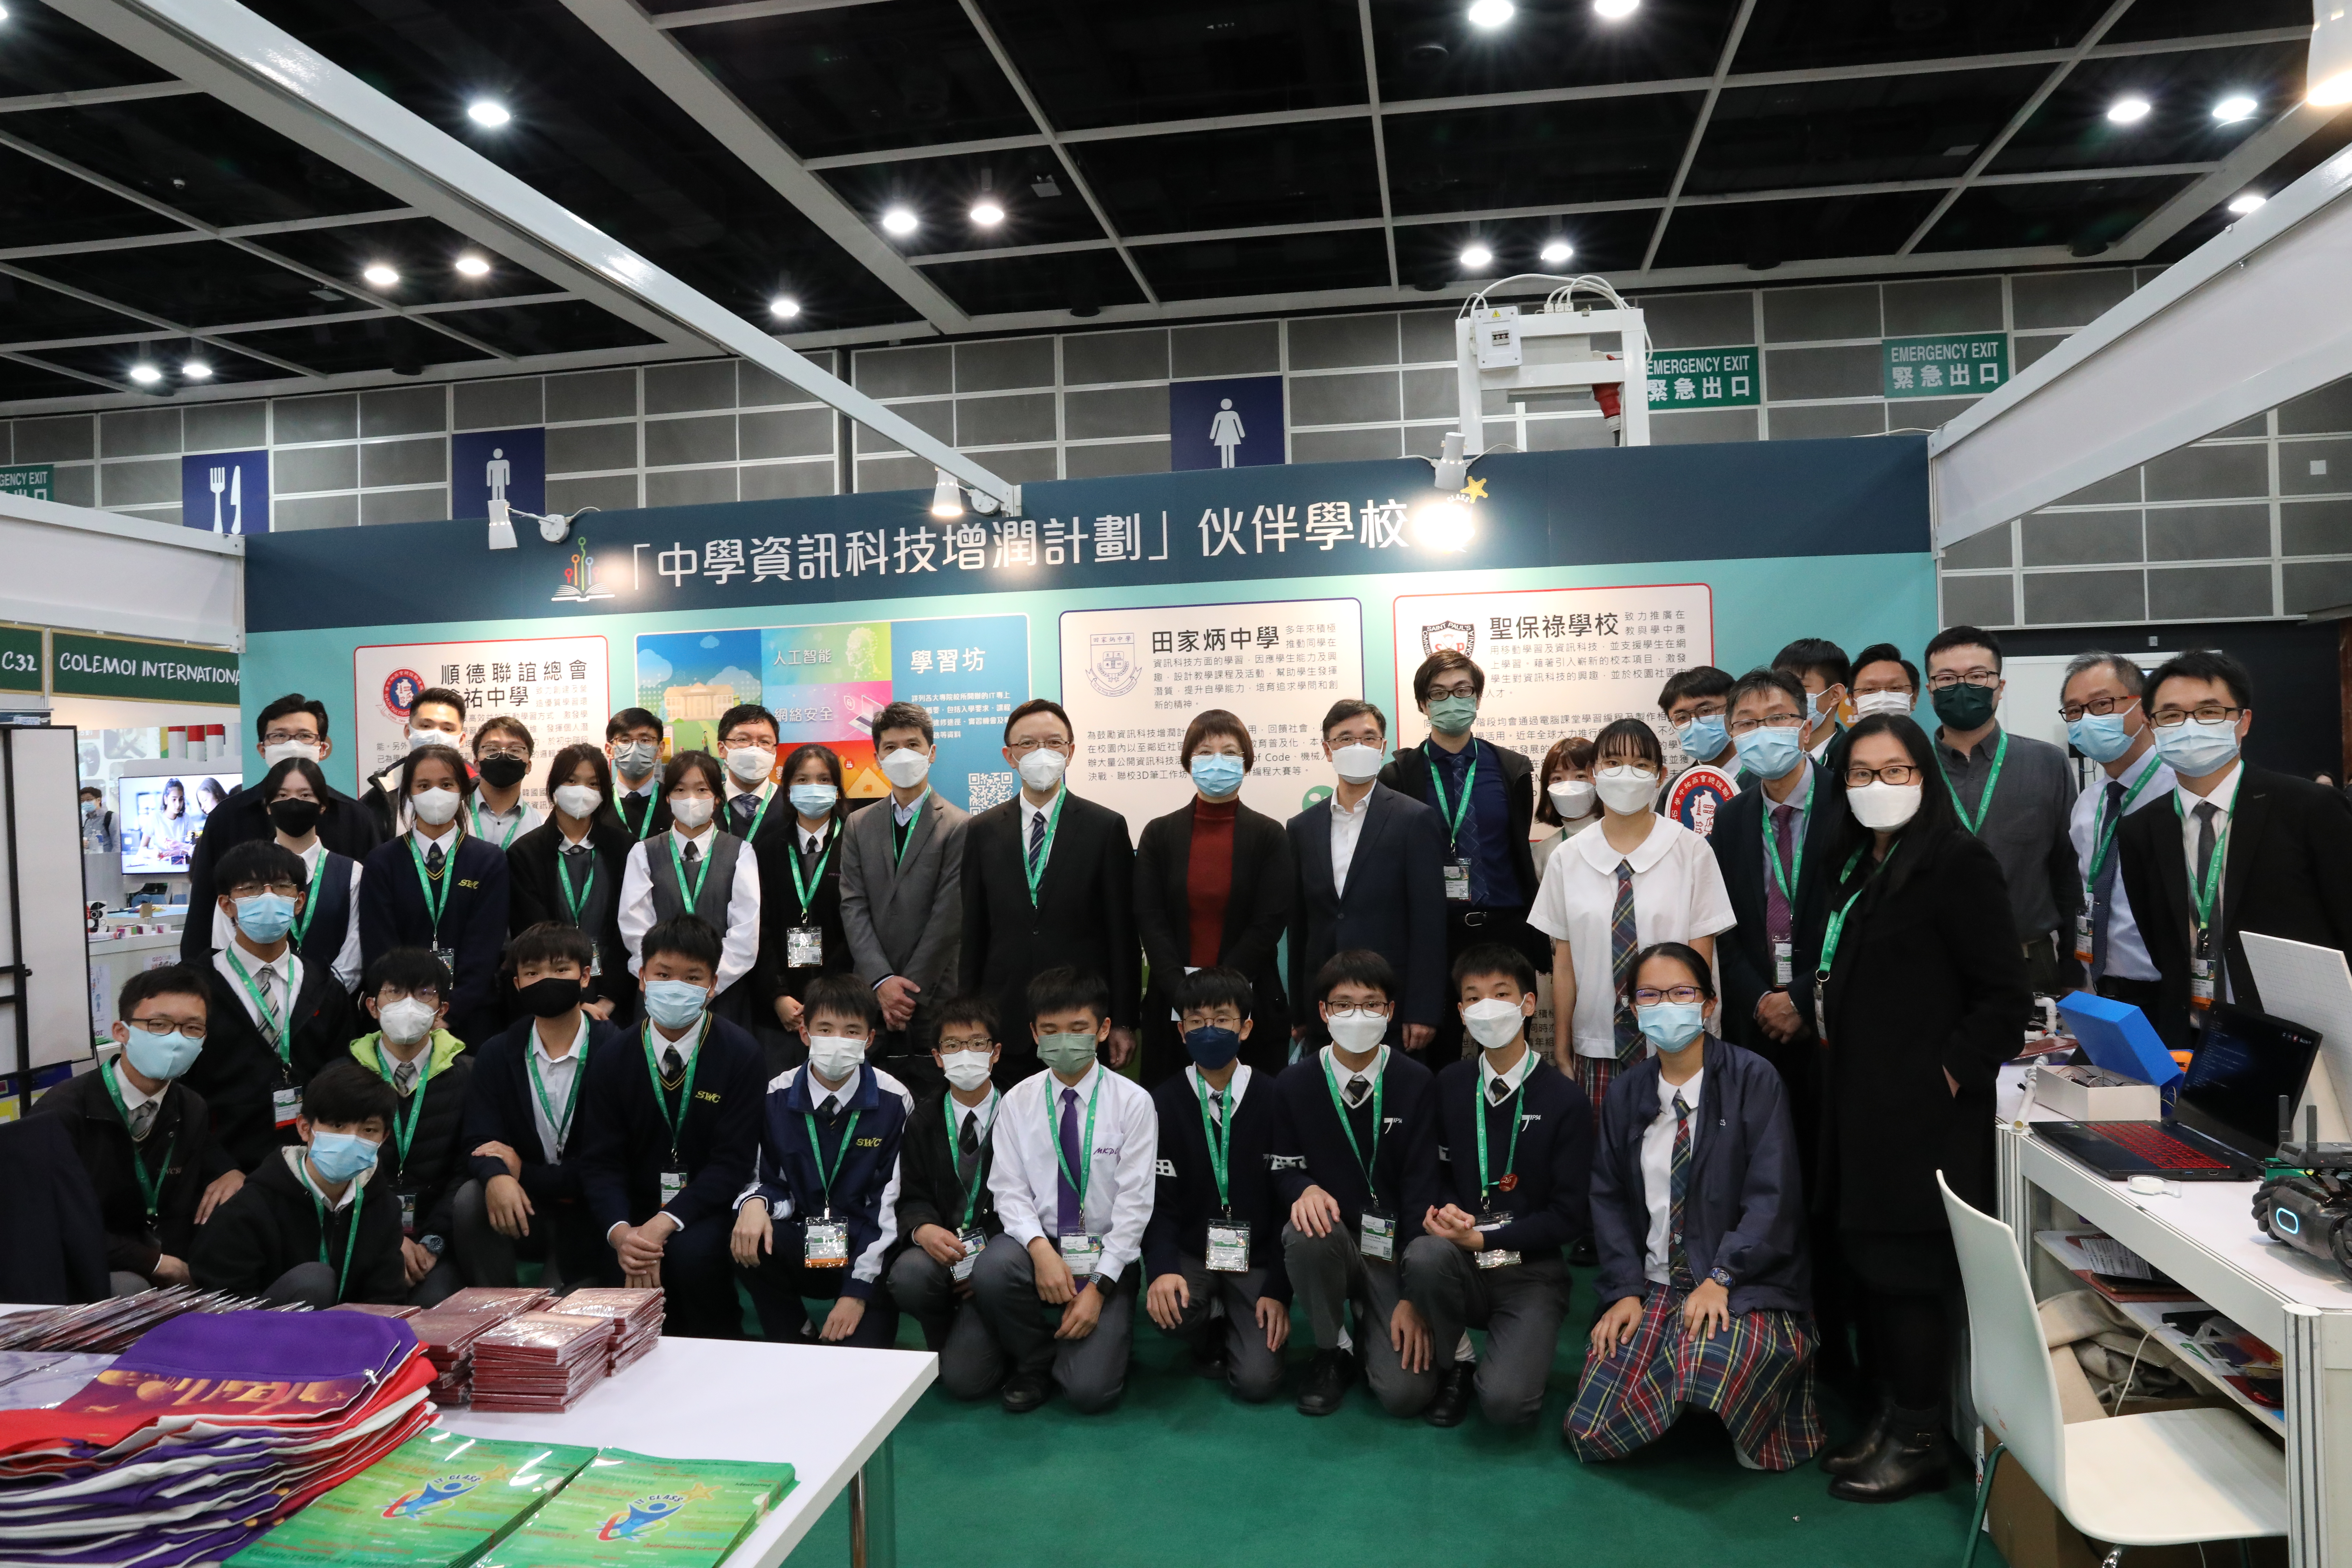 GCIO visited the work by partner schools of the “Enriched IT Programme in Secondary Schools” <br>on display in the Learning and Teaching Expo 2022 (with photos)